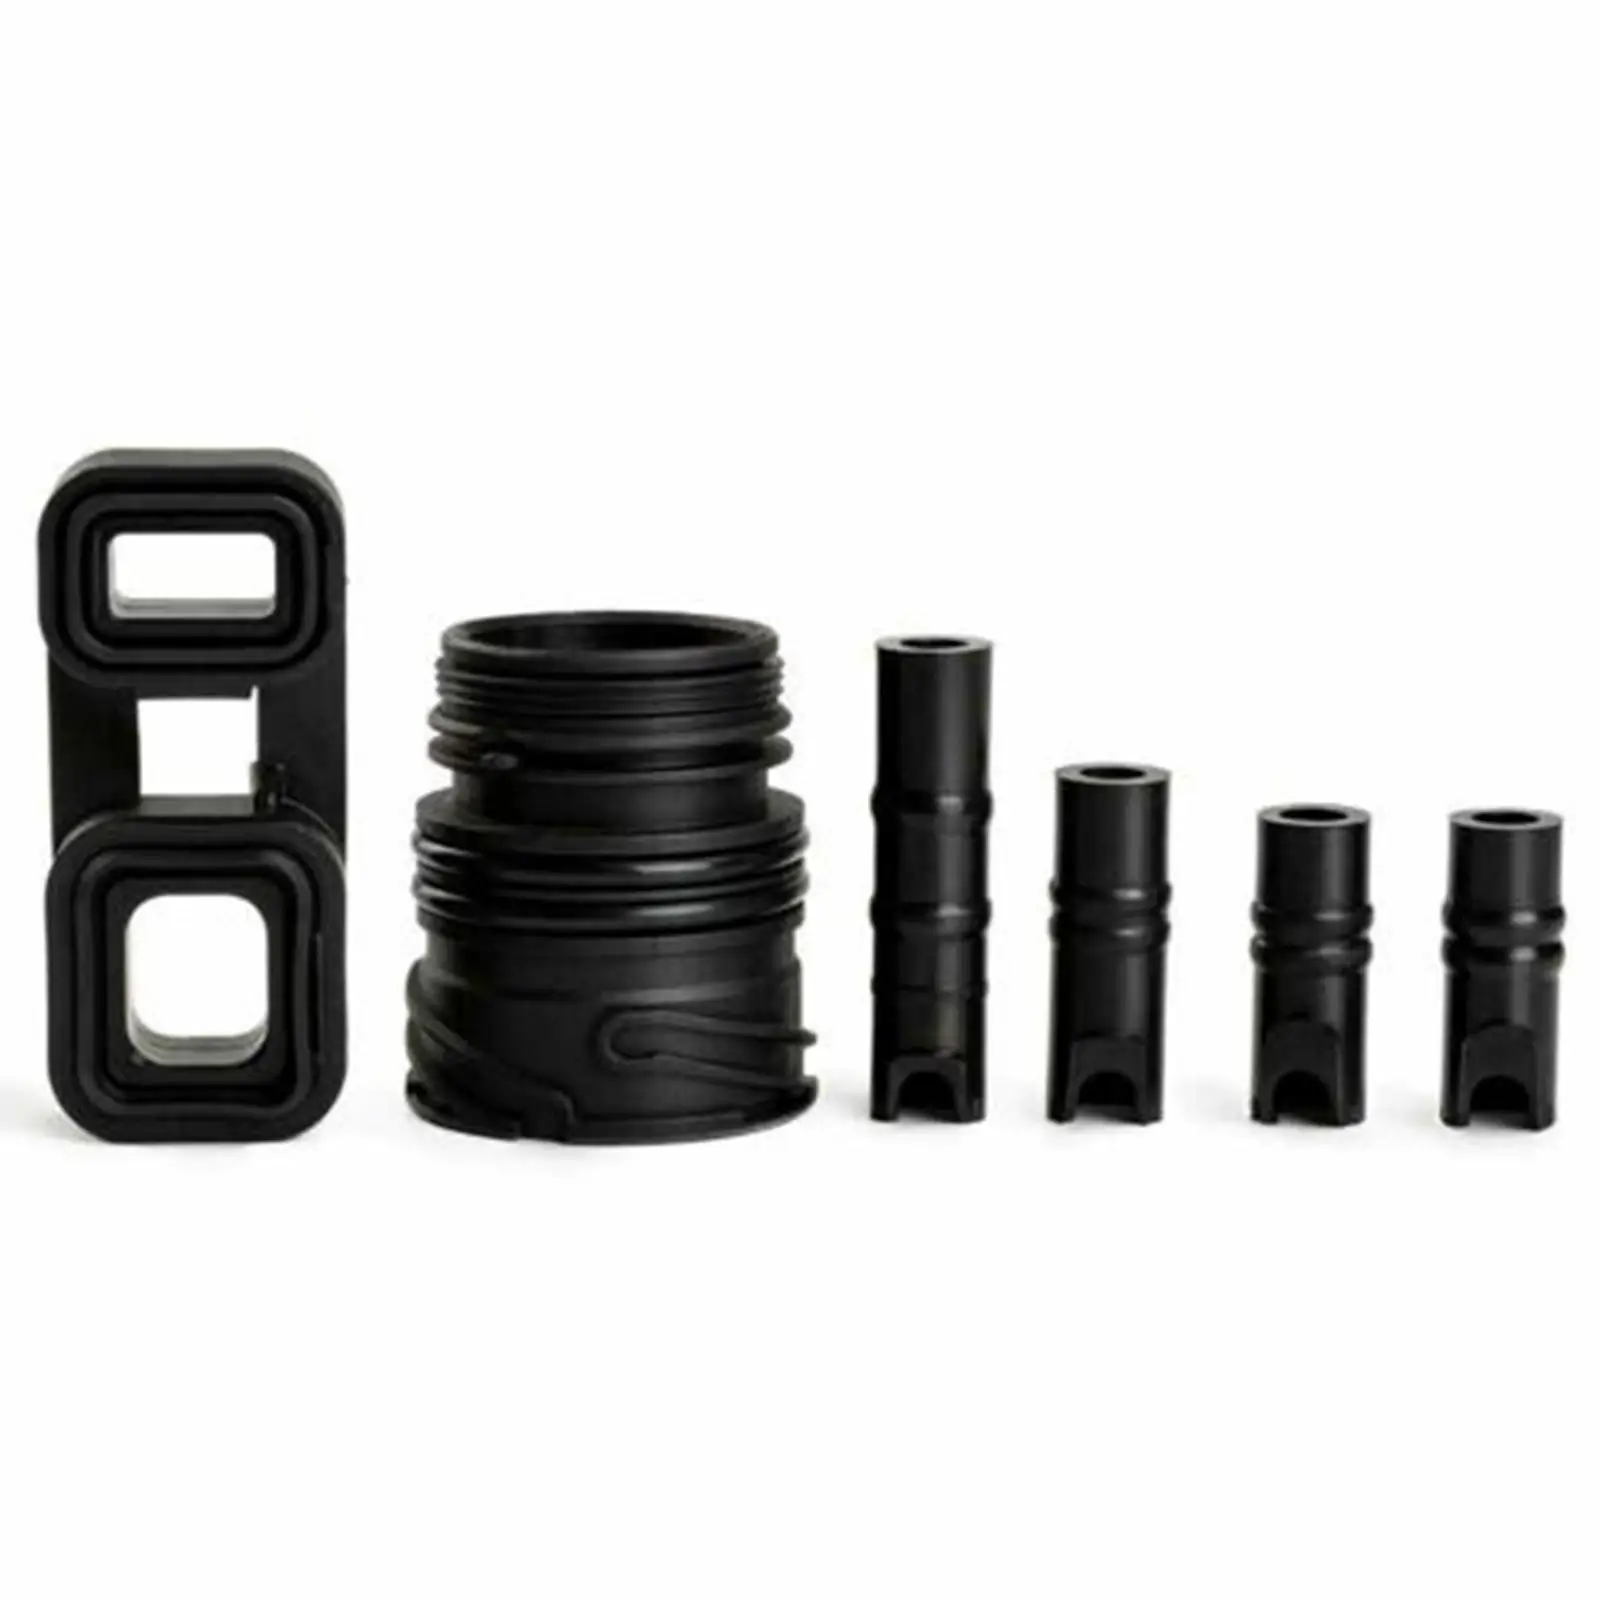 Sleeve and Adapter Seal Kit Replaces Rubber Durable for BMW 1 Series 3 Series 5